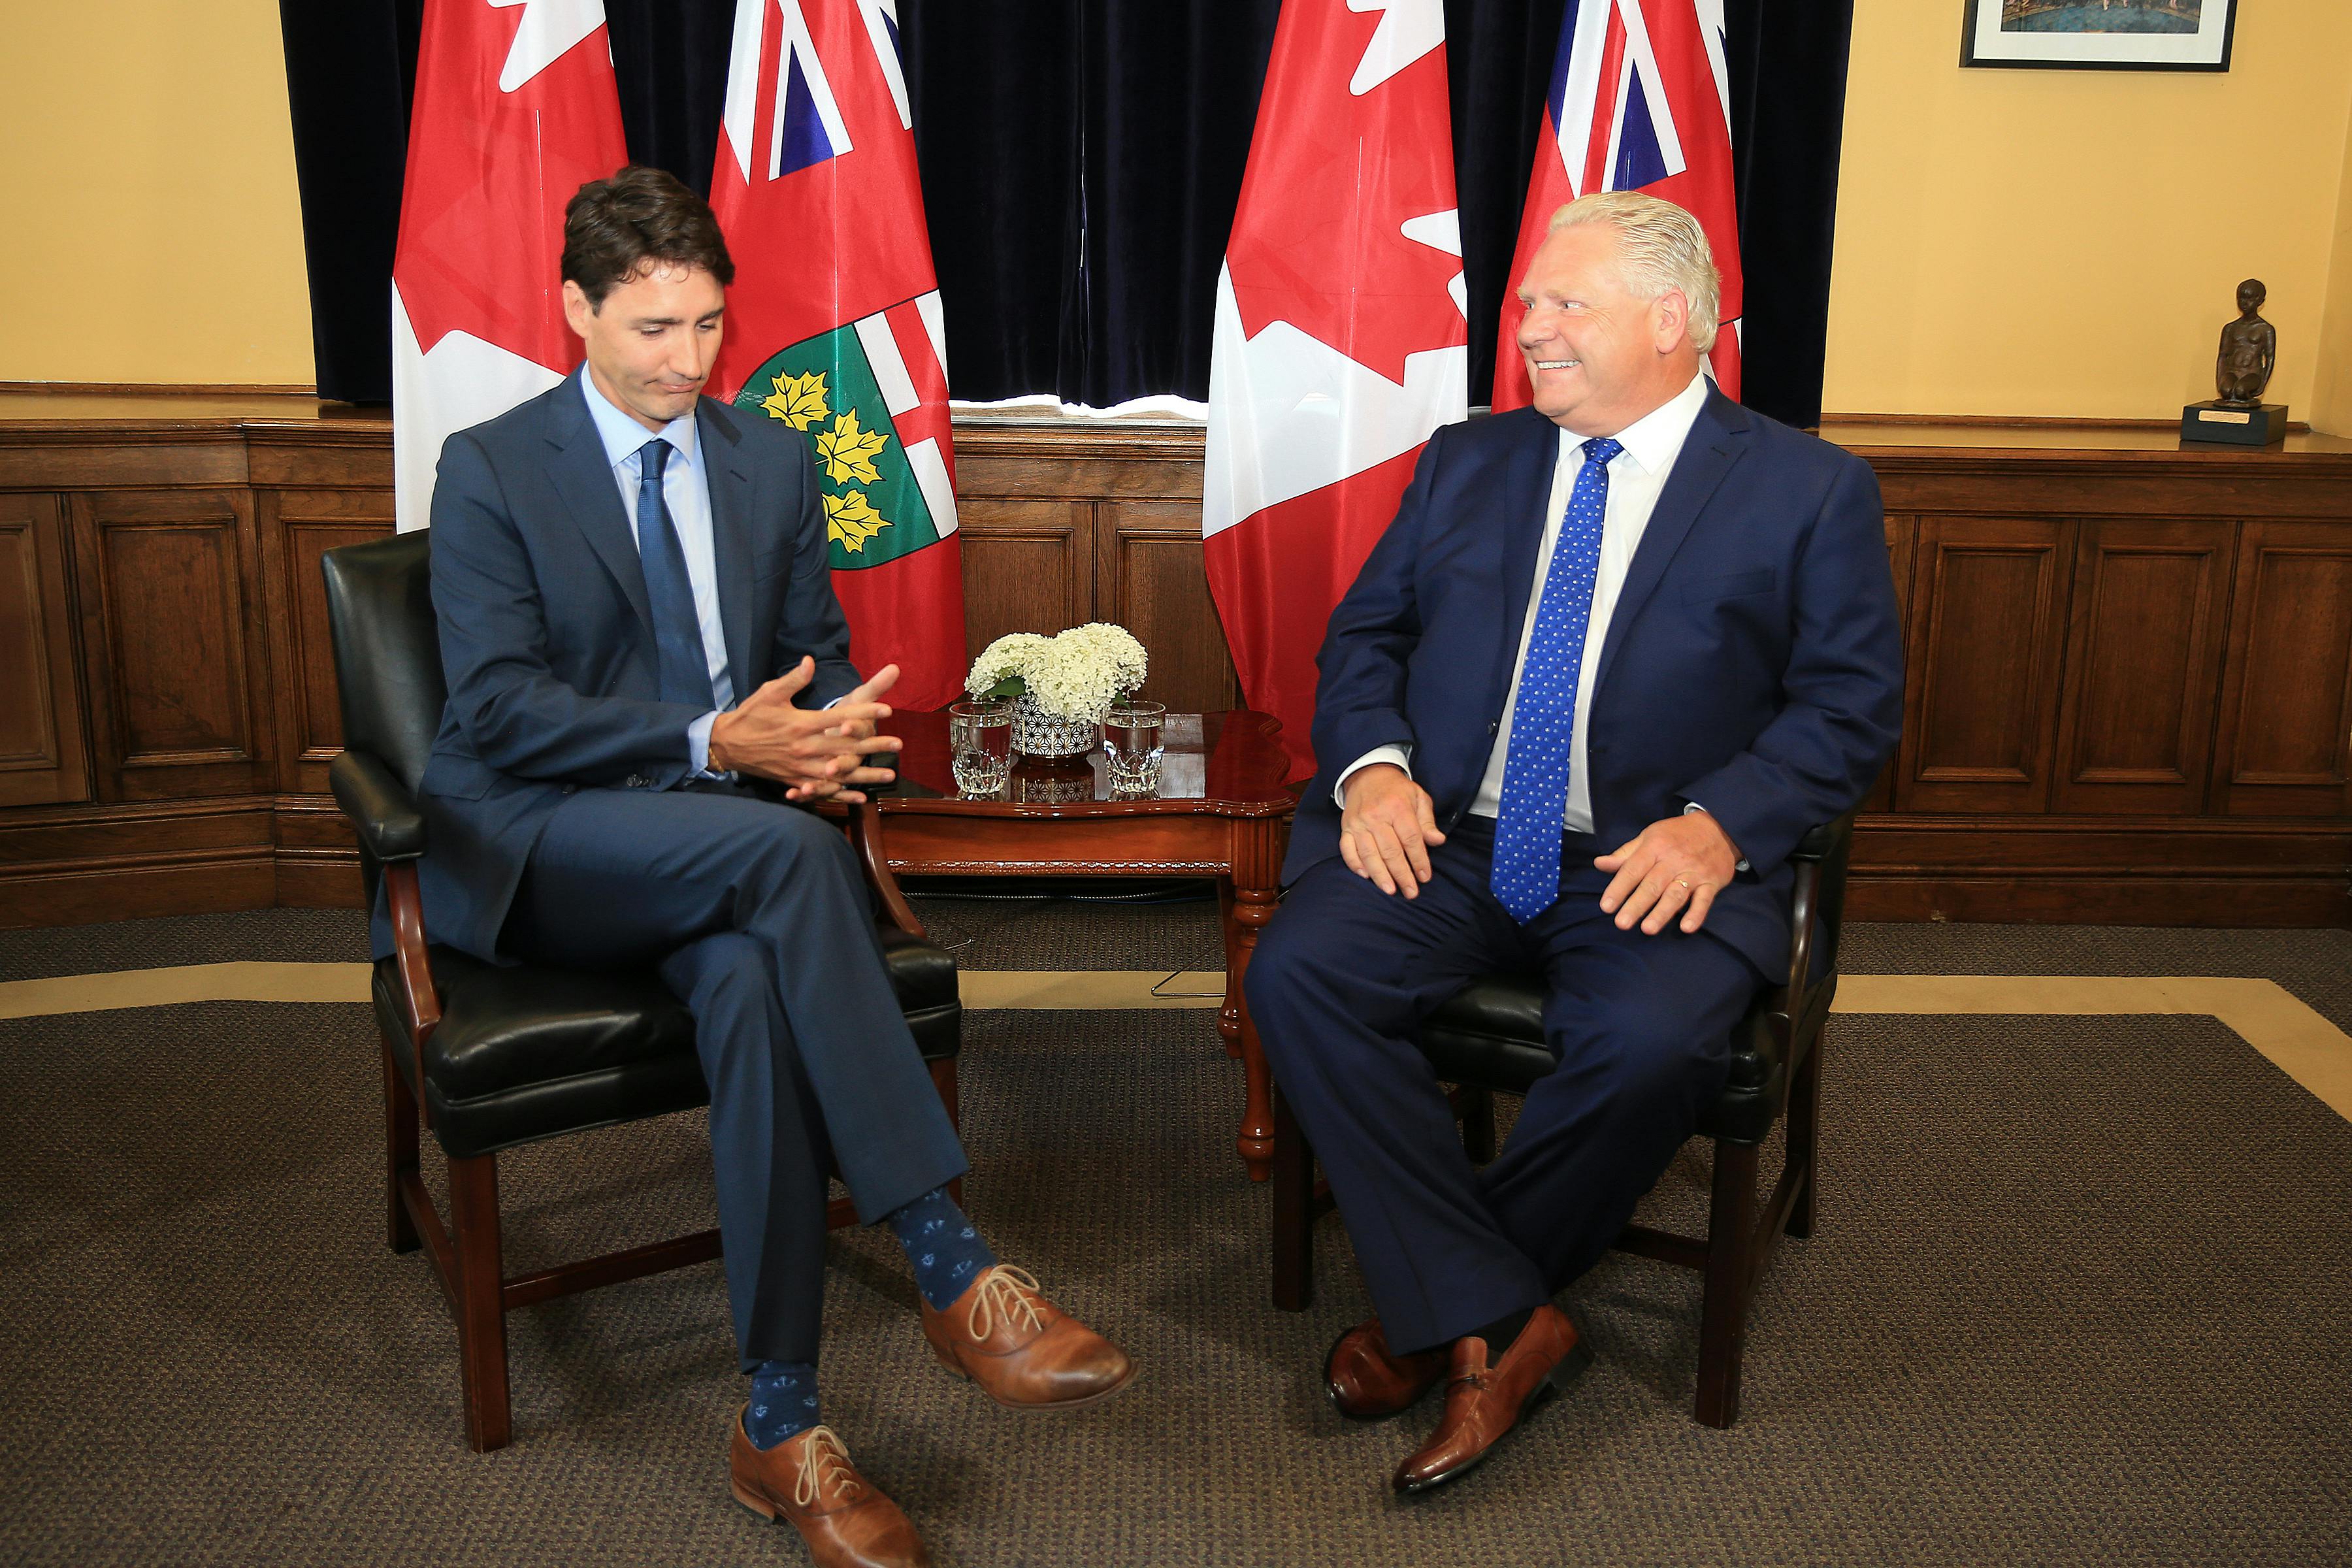 Premier Ford says feds’ $14-billion offer for all provinces ‘just won’t cut it’: Your daily roundup